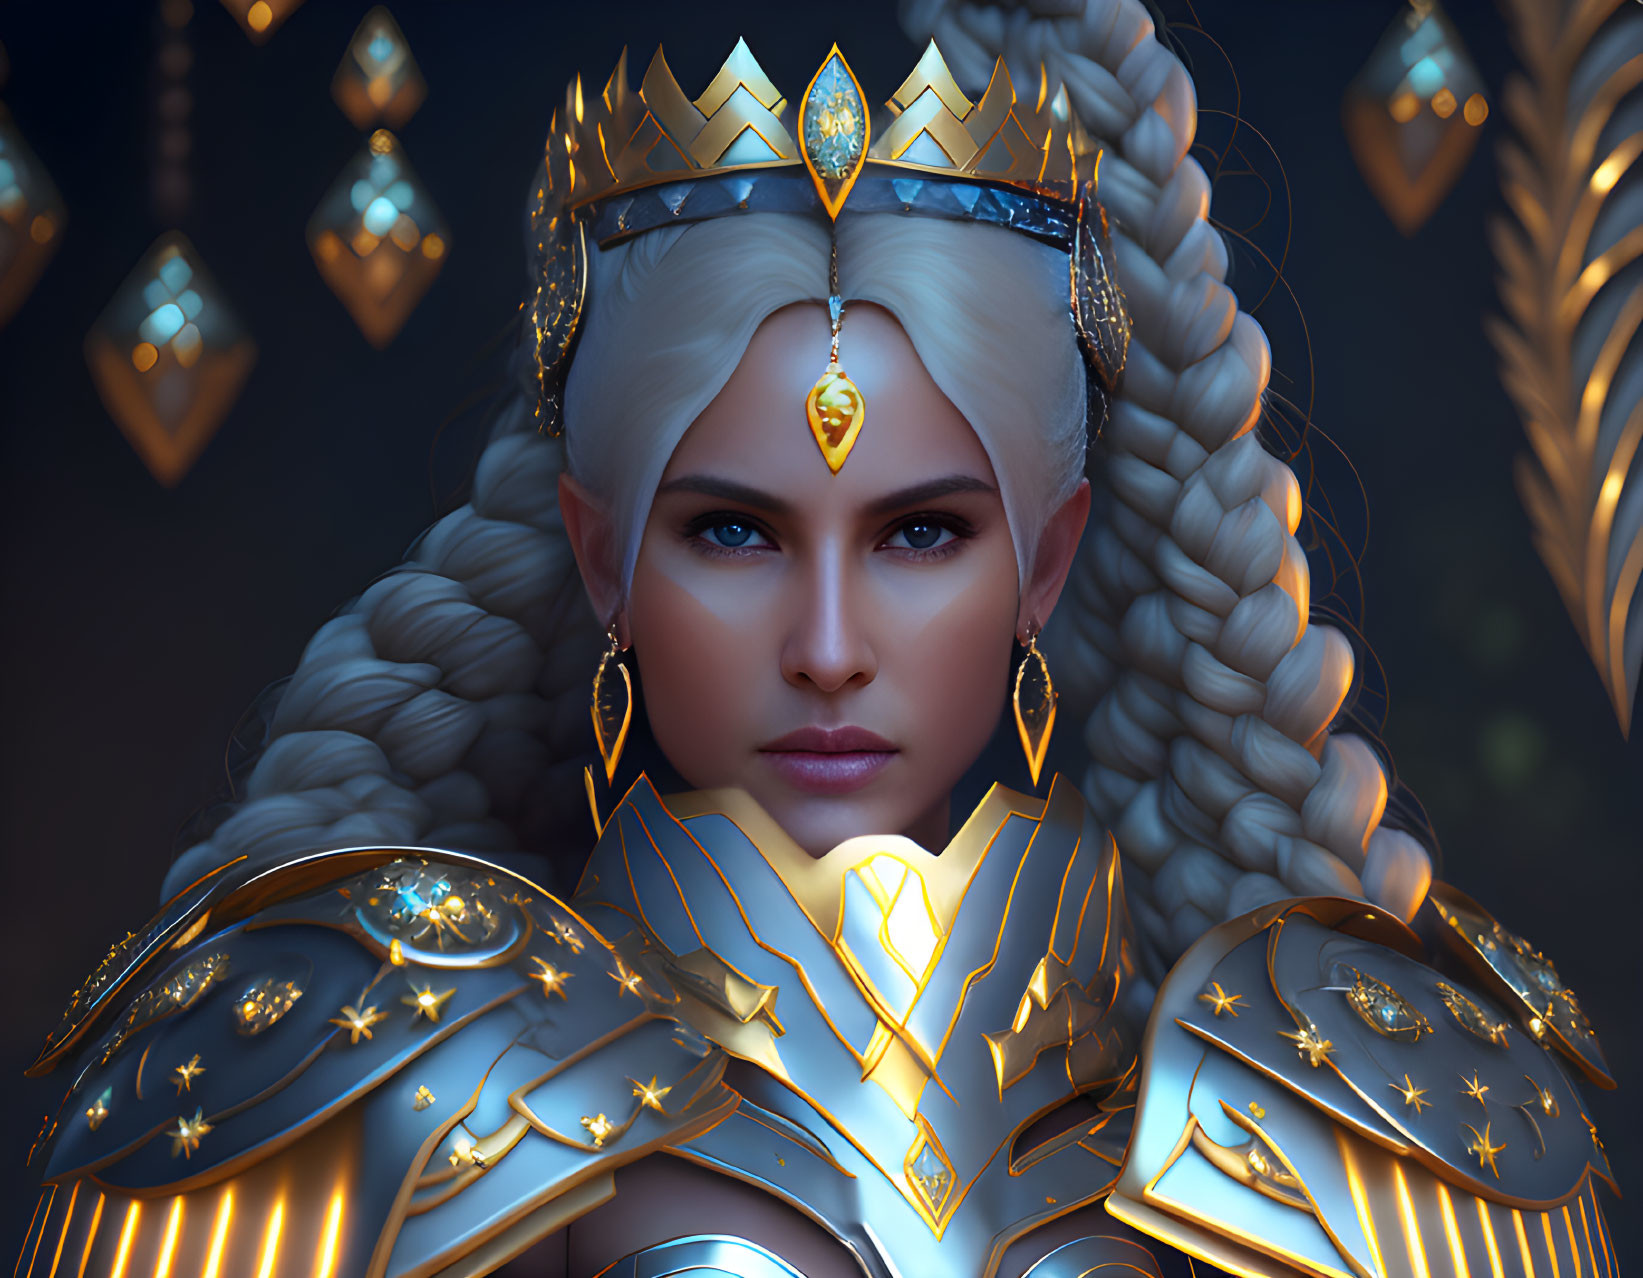 Platinum blonde woman in golden crown and armor with blue gemstones